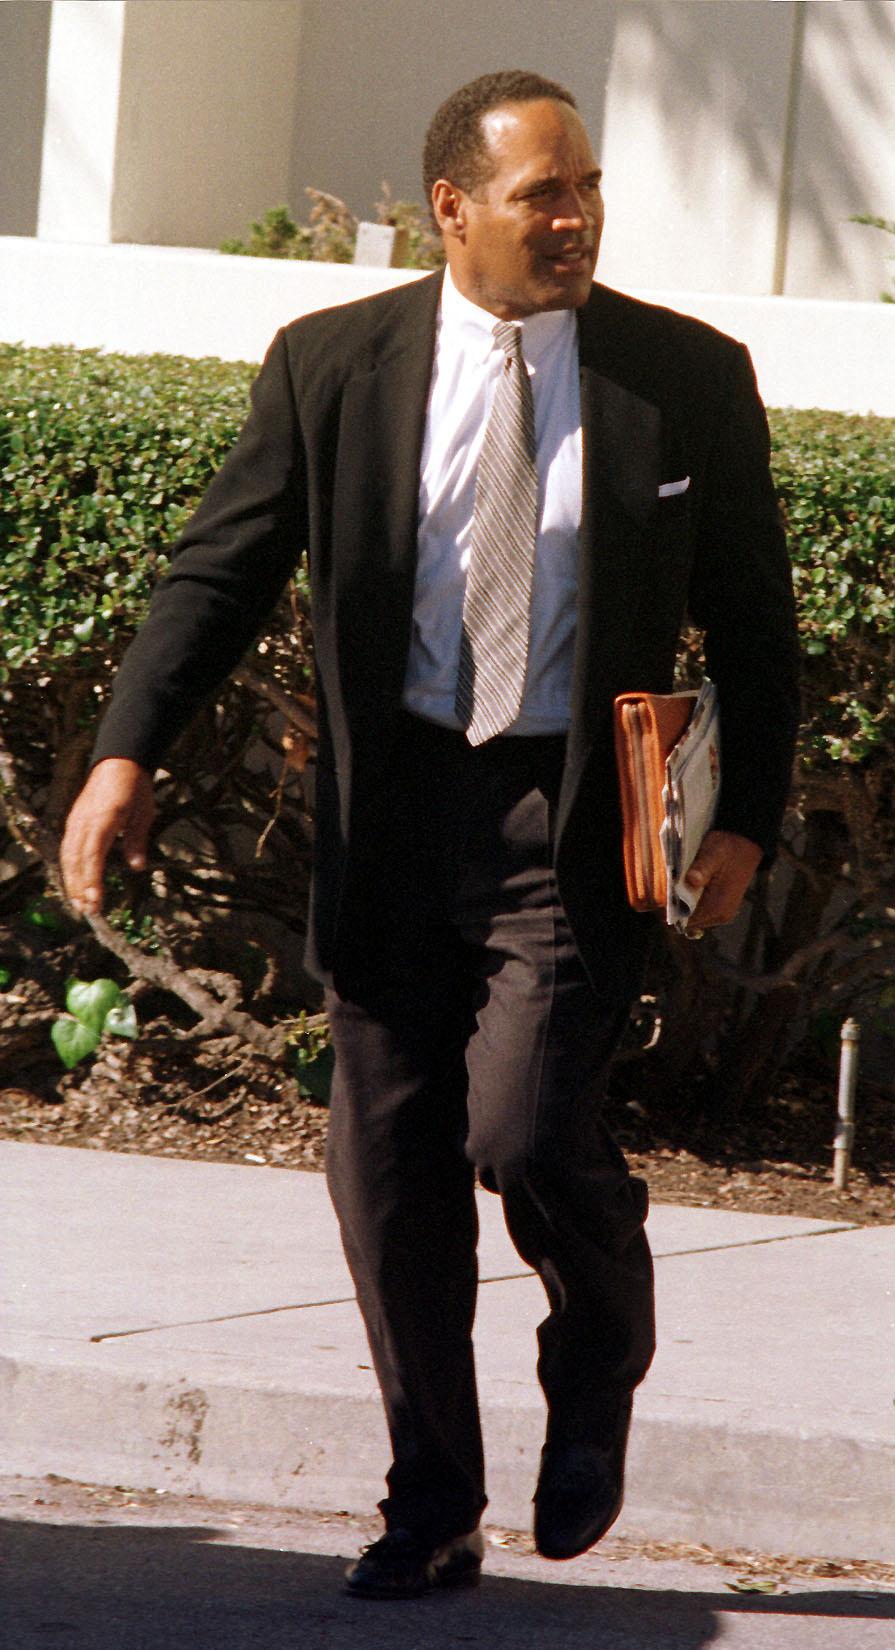 O.J. Simpson walks out from the court in Santa Monica, California